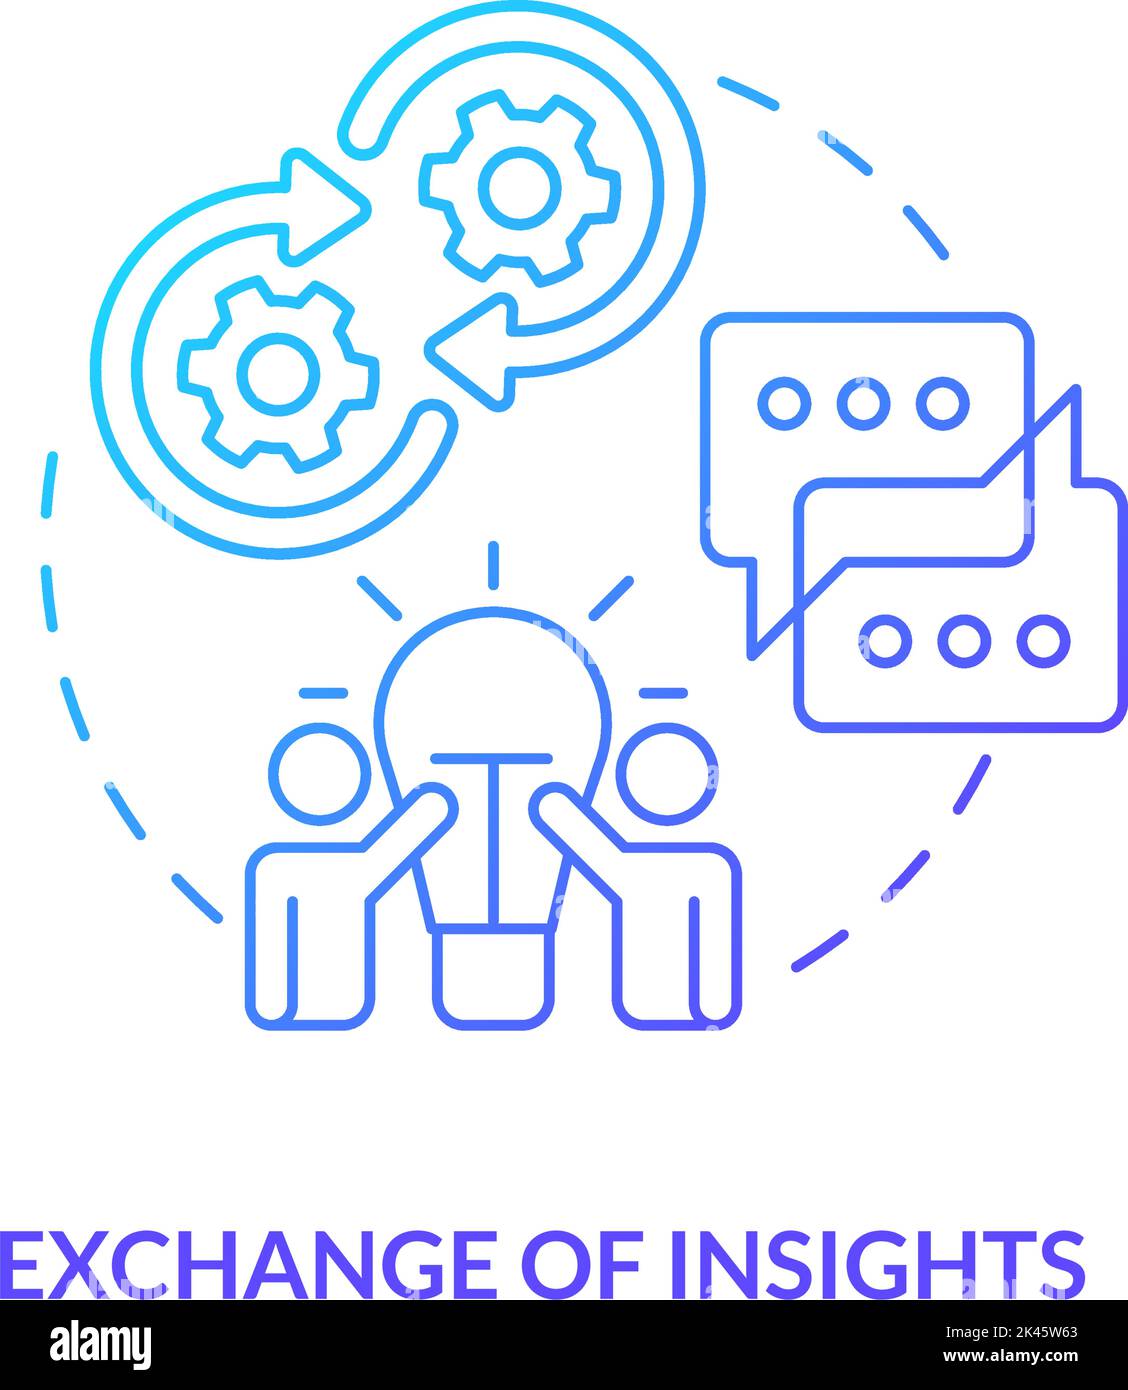 Exchange of insights blue gradient concept icon Stock Vector